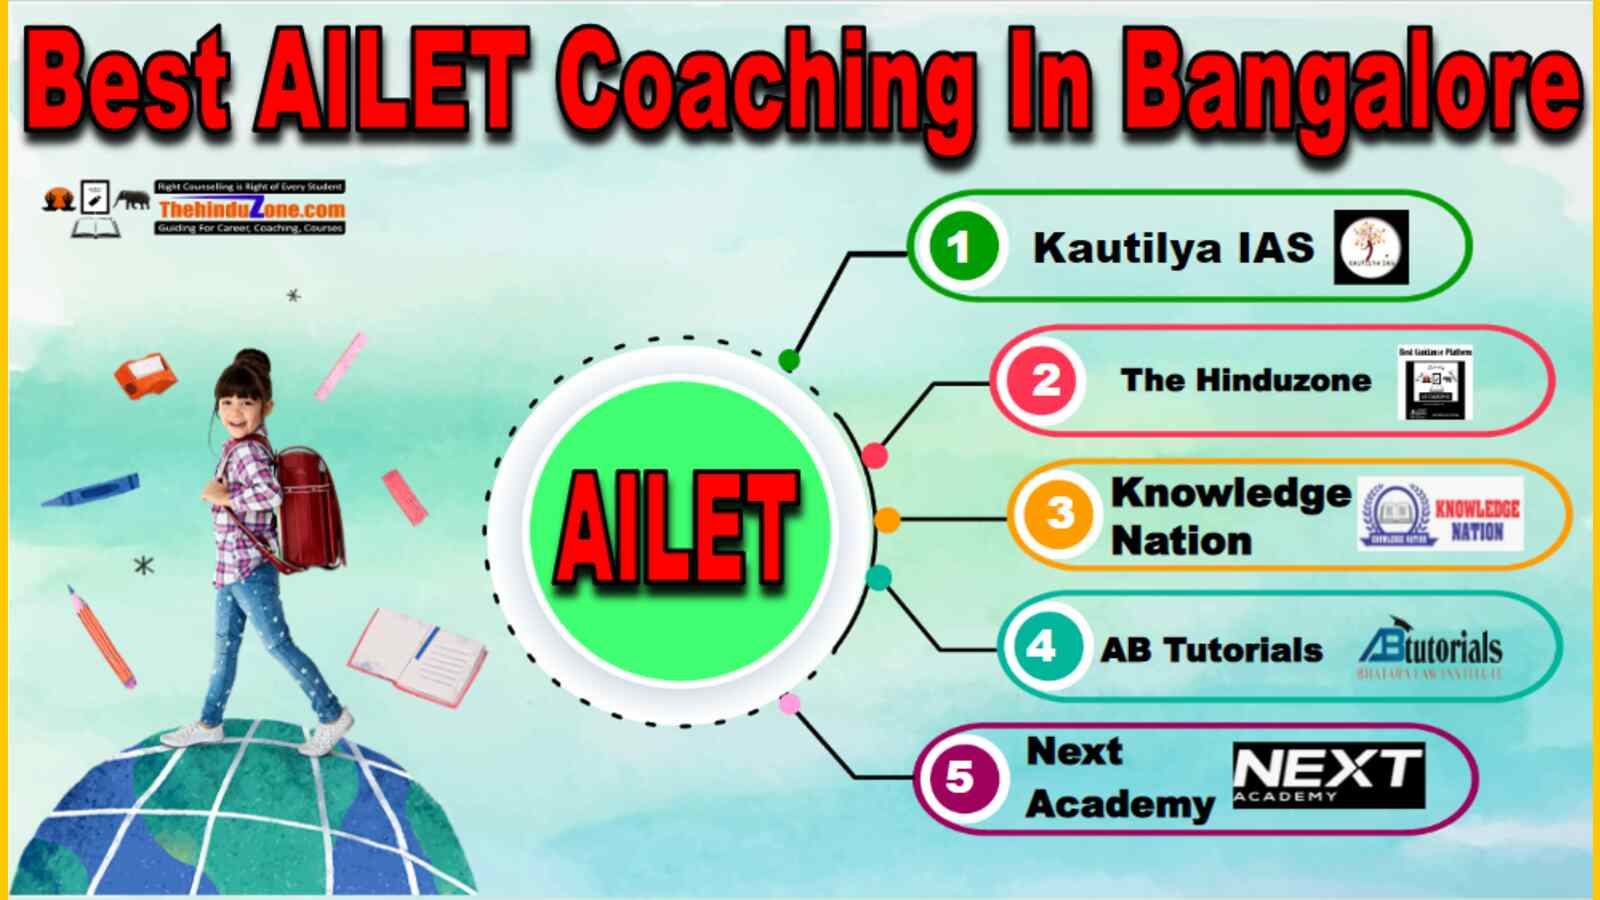 Best AILET Coaching In Bangalore